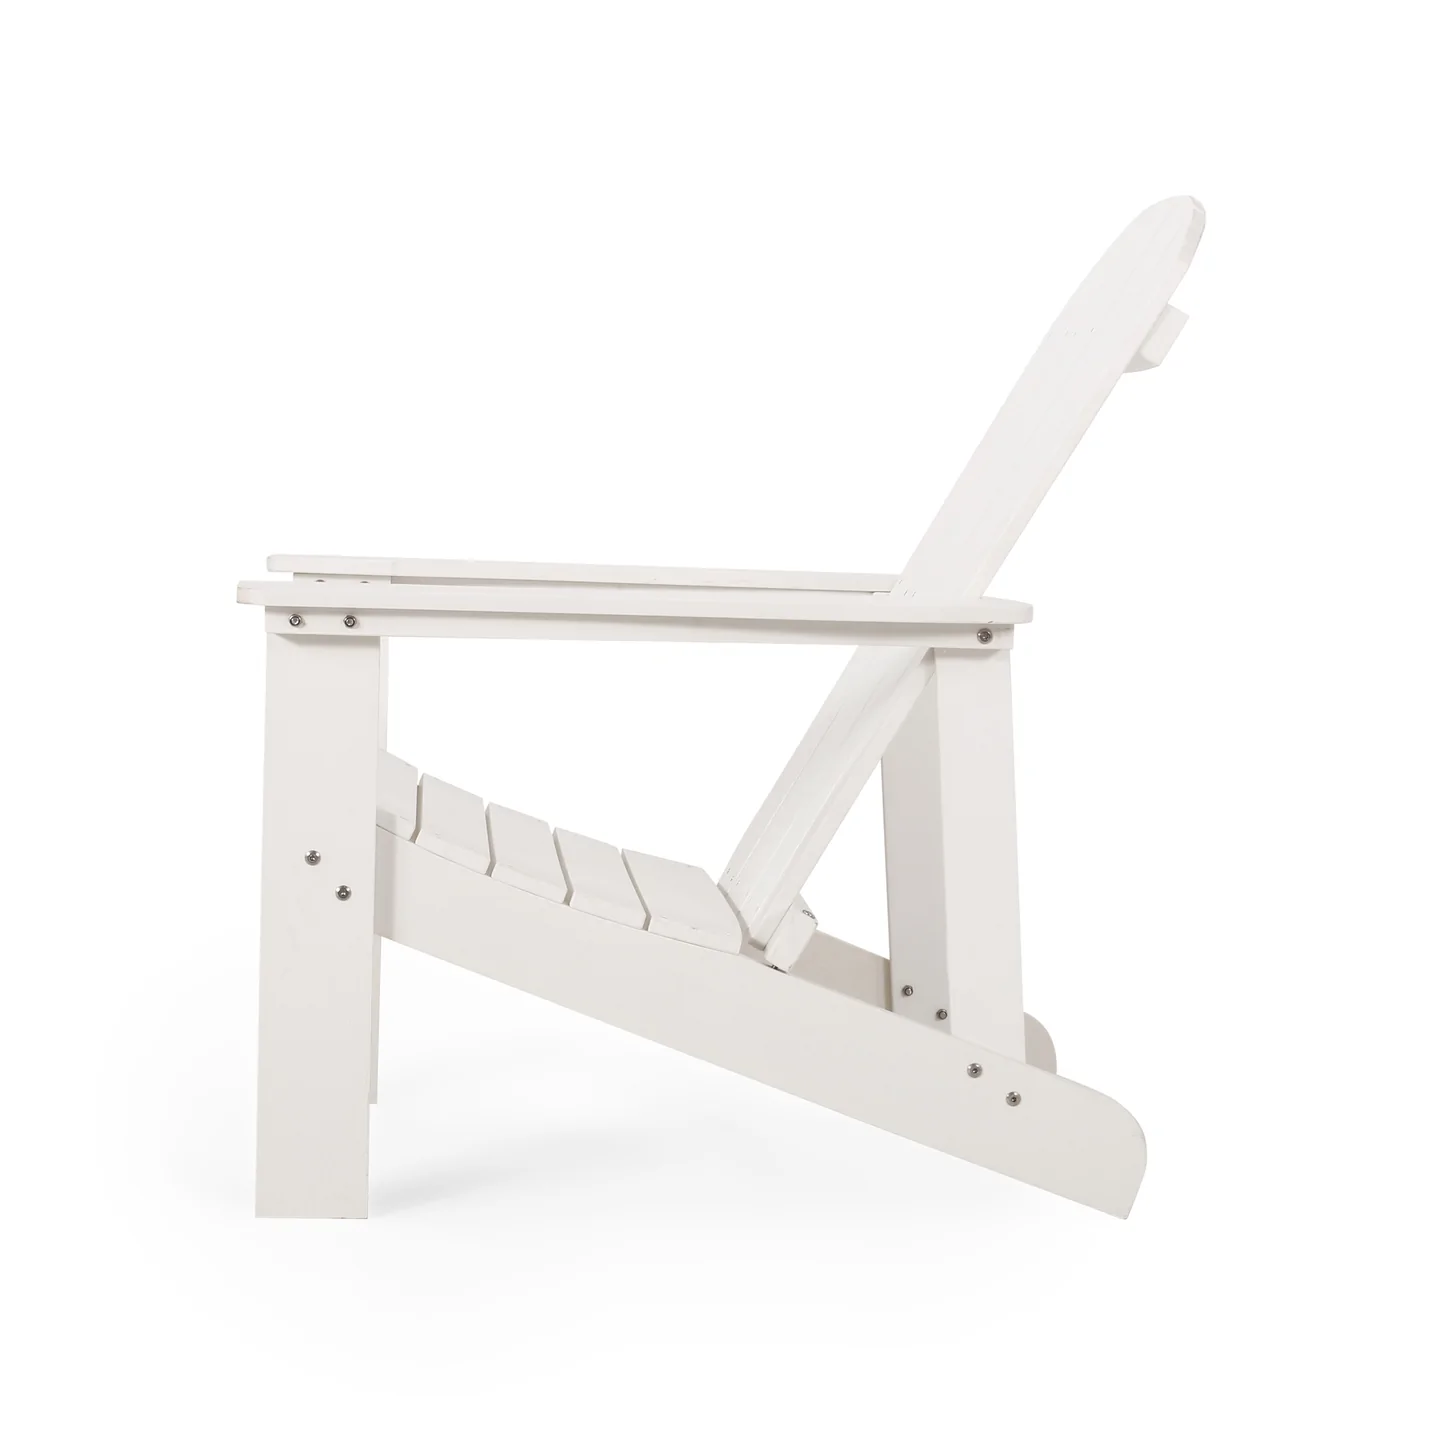 KUIKUI Classic Pure White Outdoor Solid Wood Adirondack Chair Garden Lounge Chair - image 2 of 5